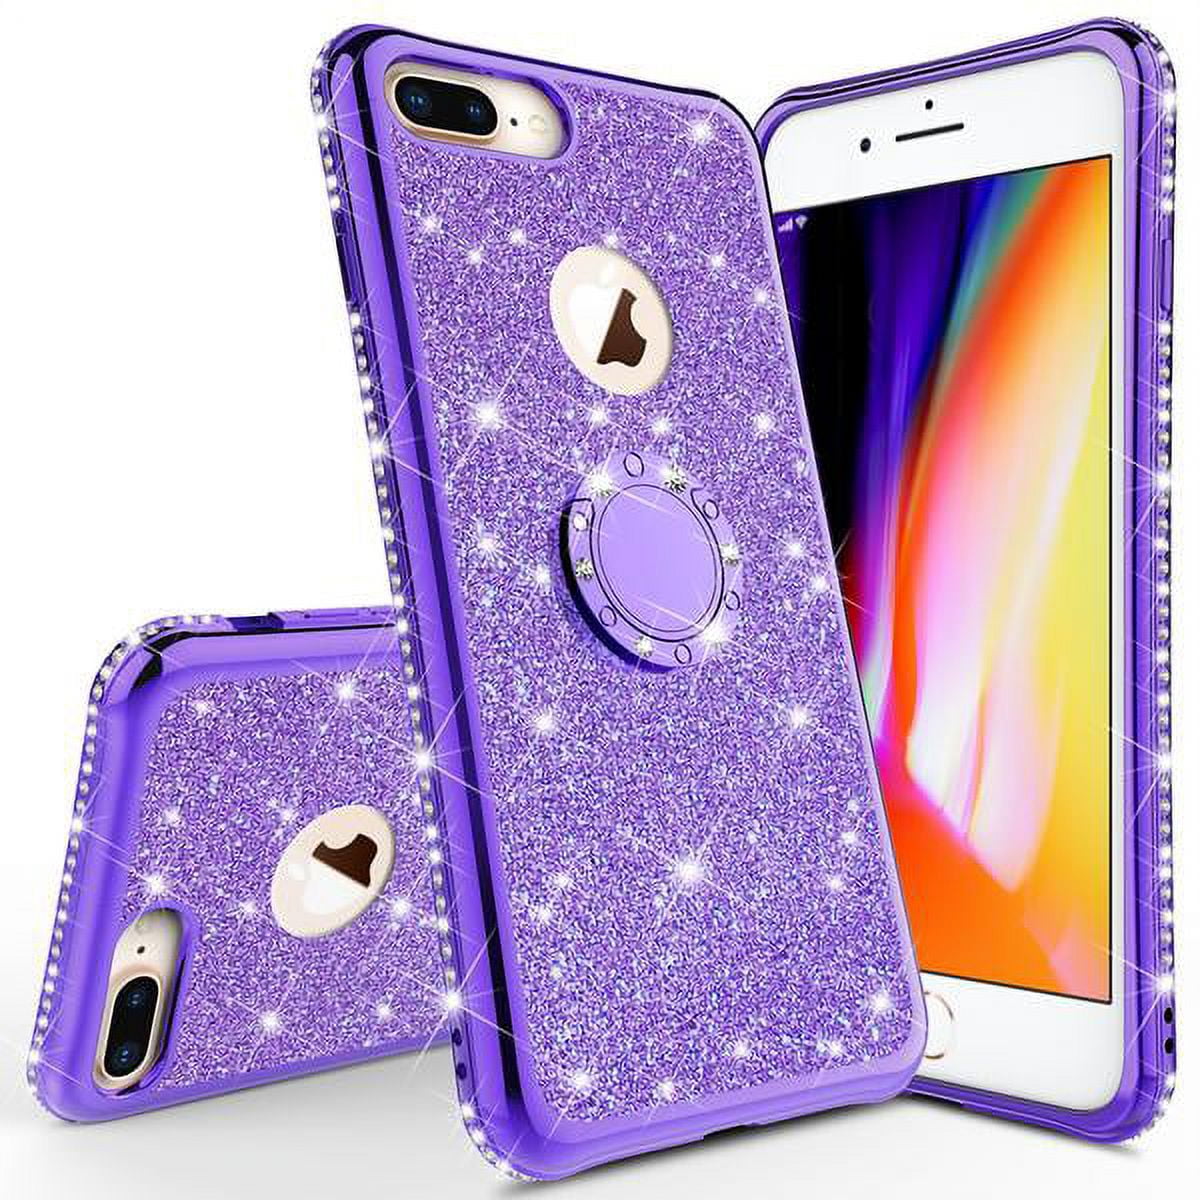  Black Lemon Phone Case for iPhone 7 Plus/iPhone 8 Plus Case for  Womens and Girls Soft Silicone iPhone Cases Cover Cute Bling Rhinestones  Glitter Diamond Hard Back Rubber Bumper Protective Case (